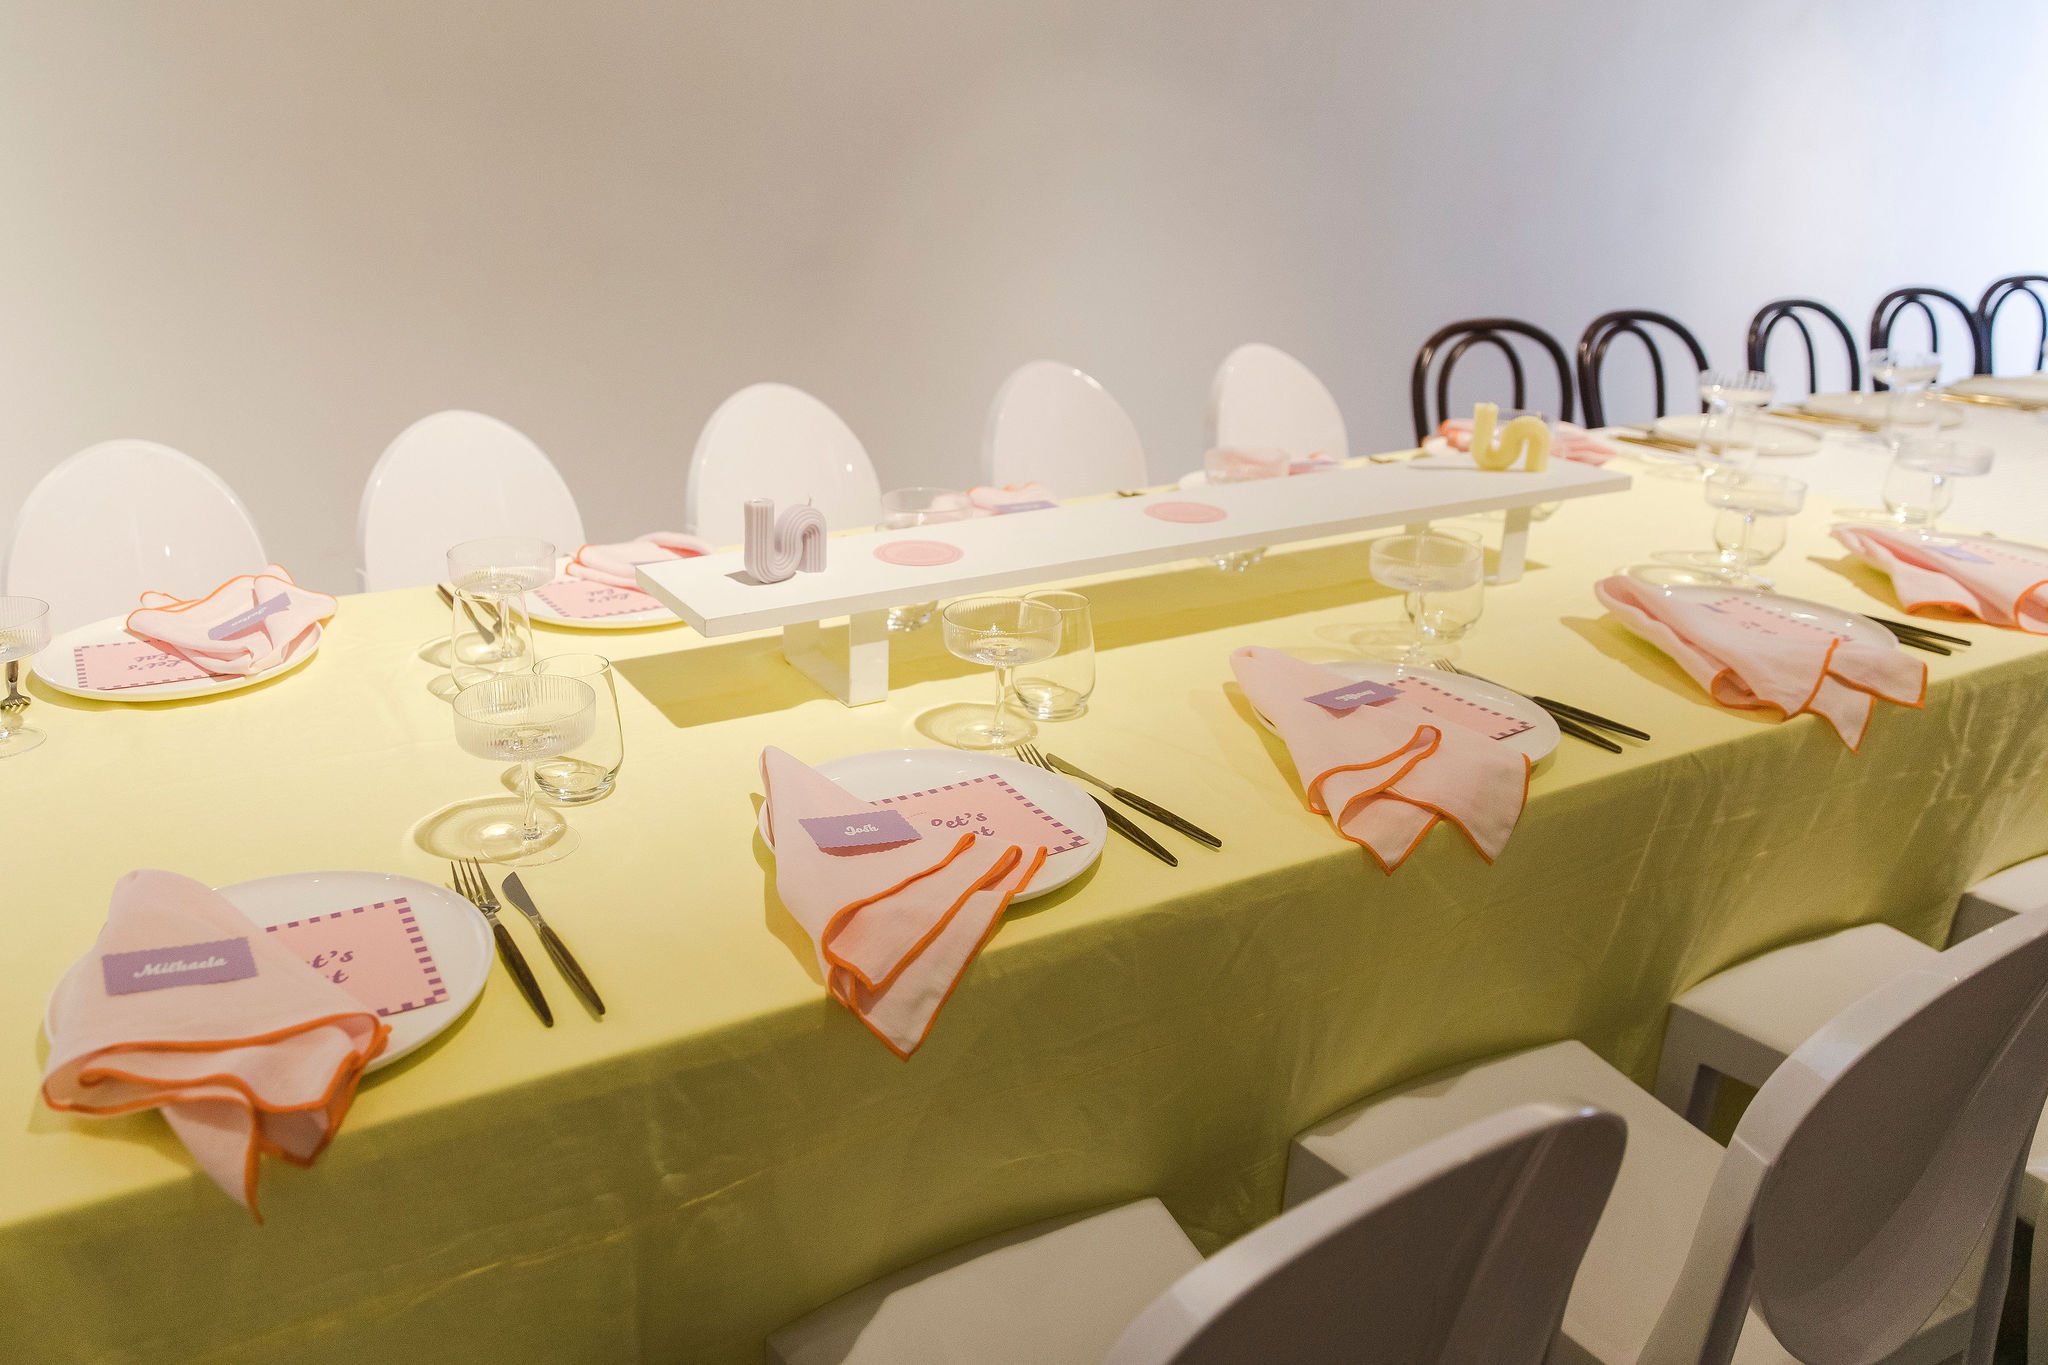 Daffodil Tablecloth with Pink and Orange Contrast Hem Napkins